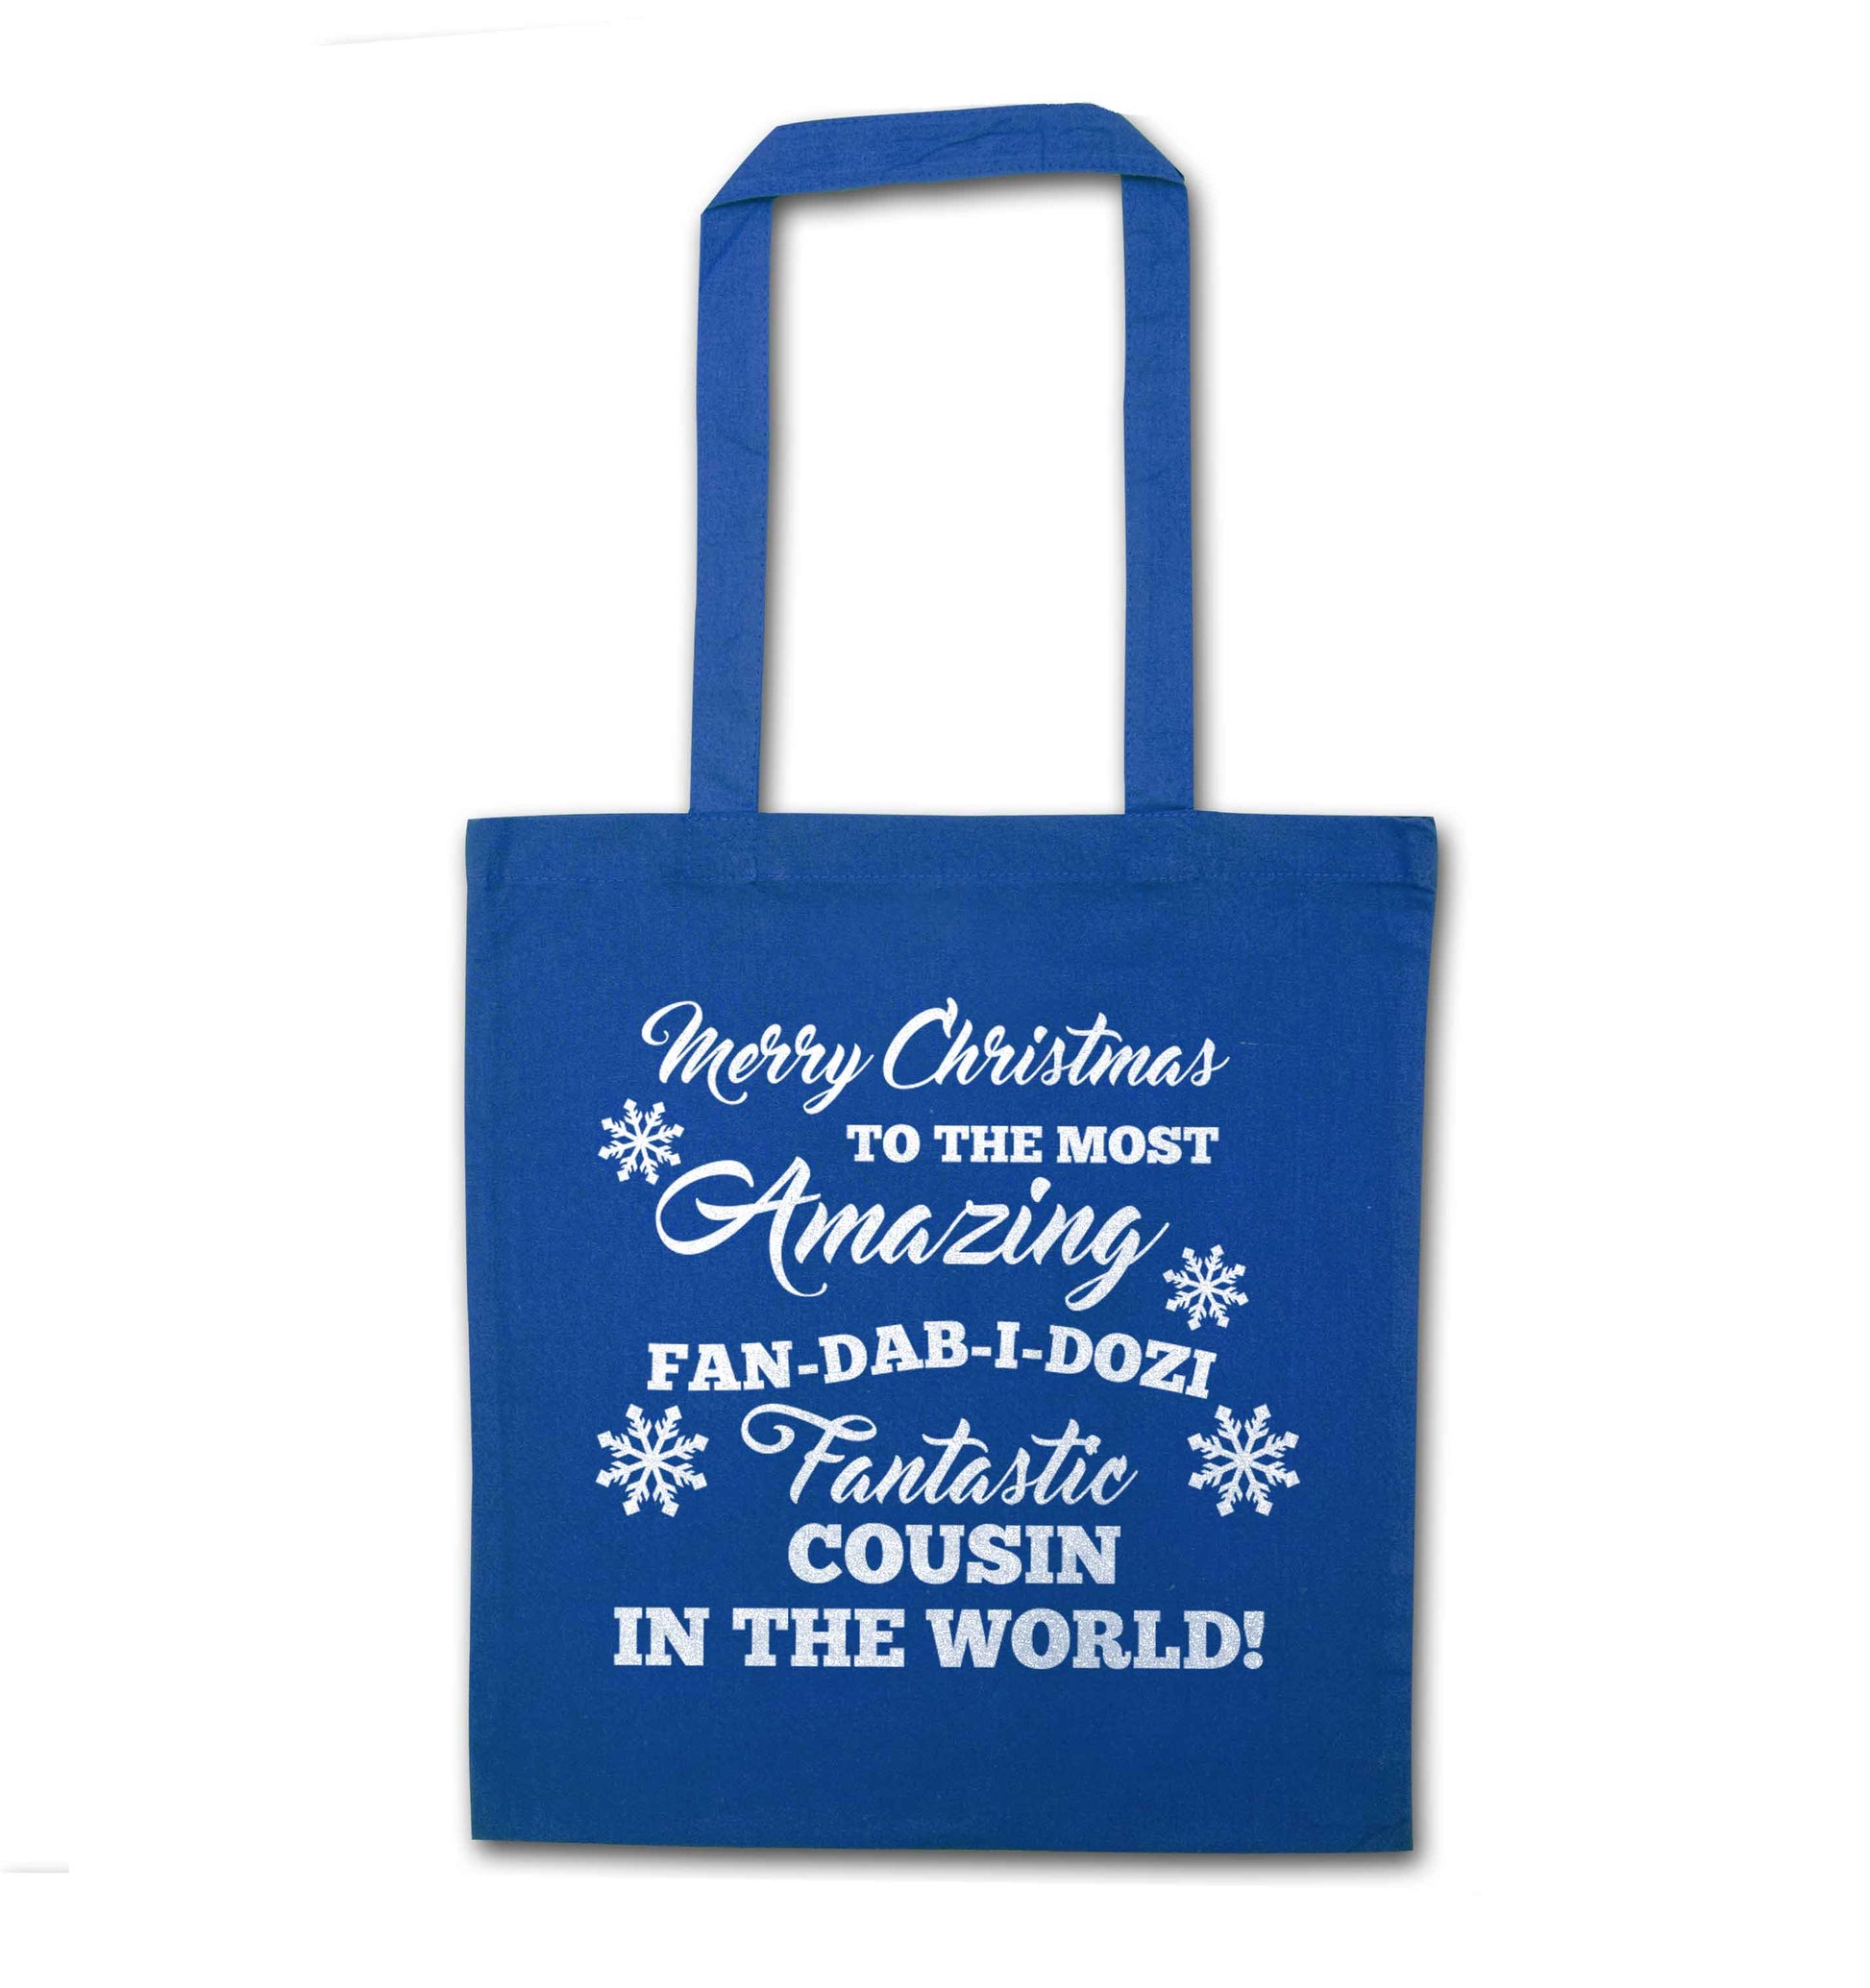 Merry Christmas to the most amazing fan-dab-i-dozi fantasic Cousin in the world blue tote bag